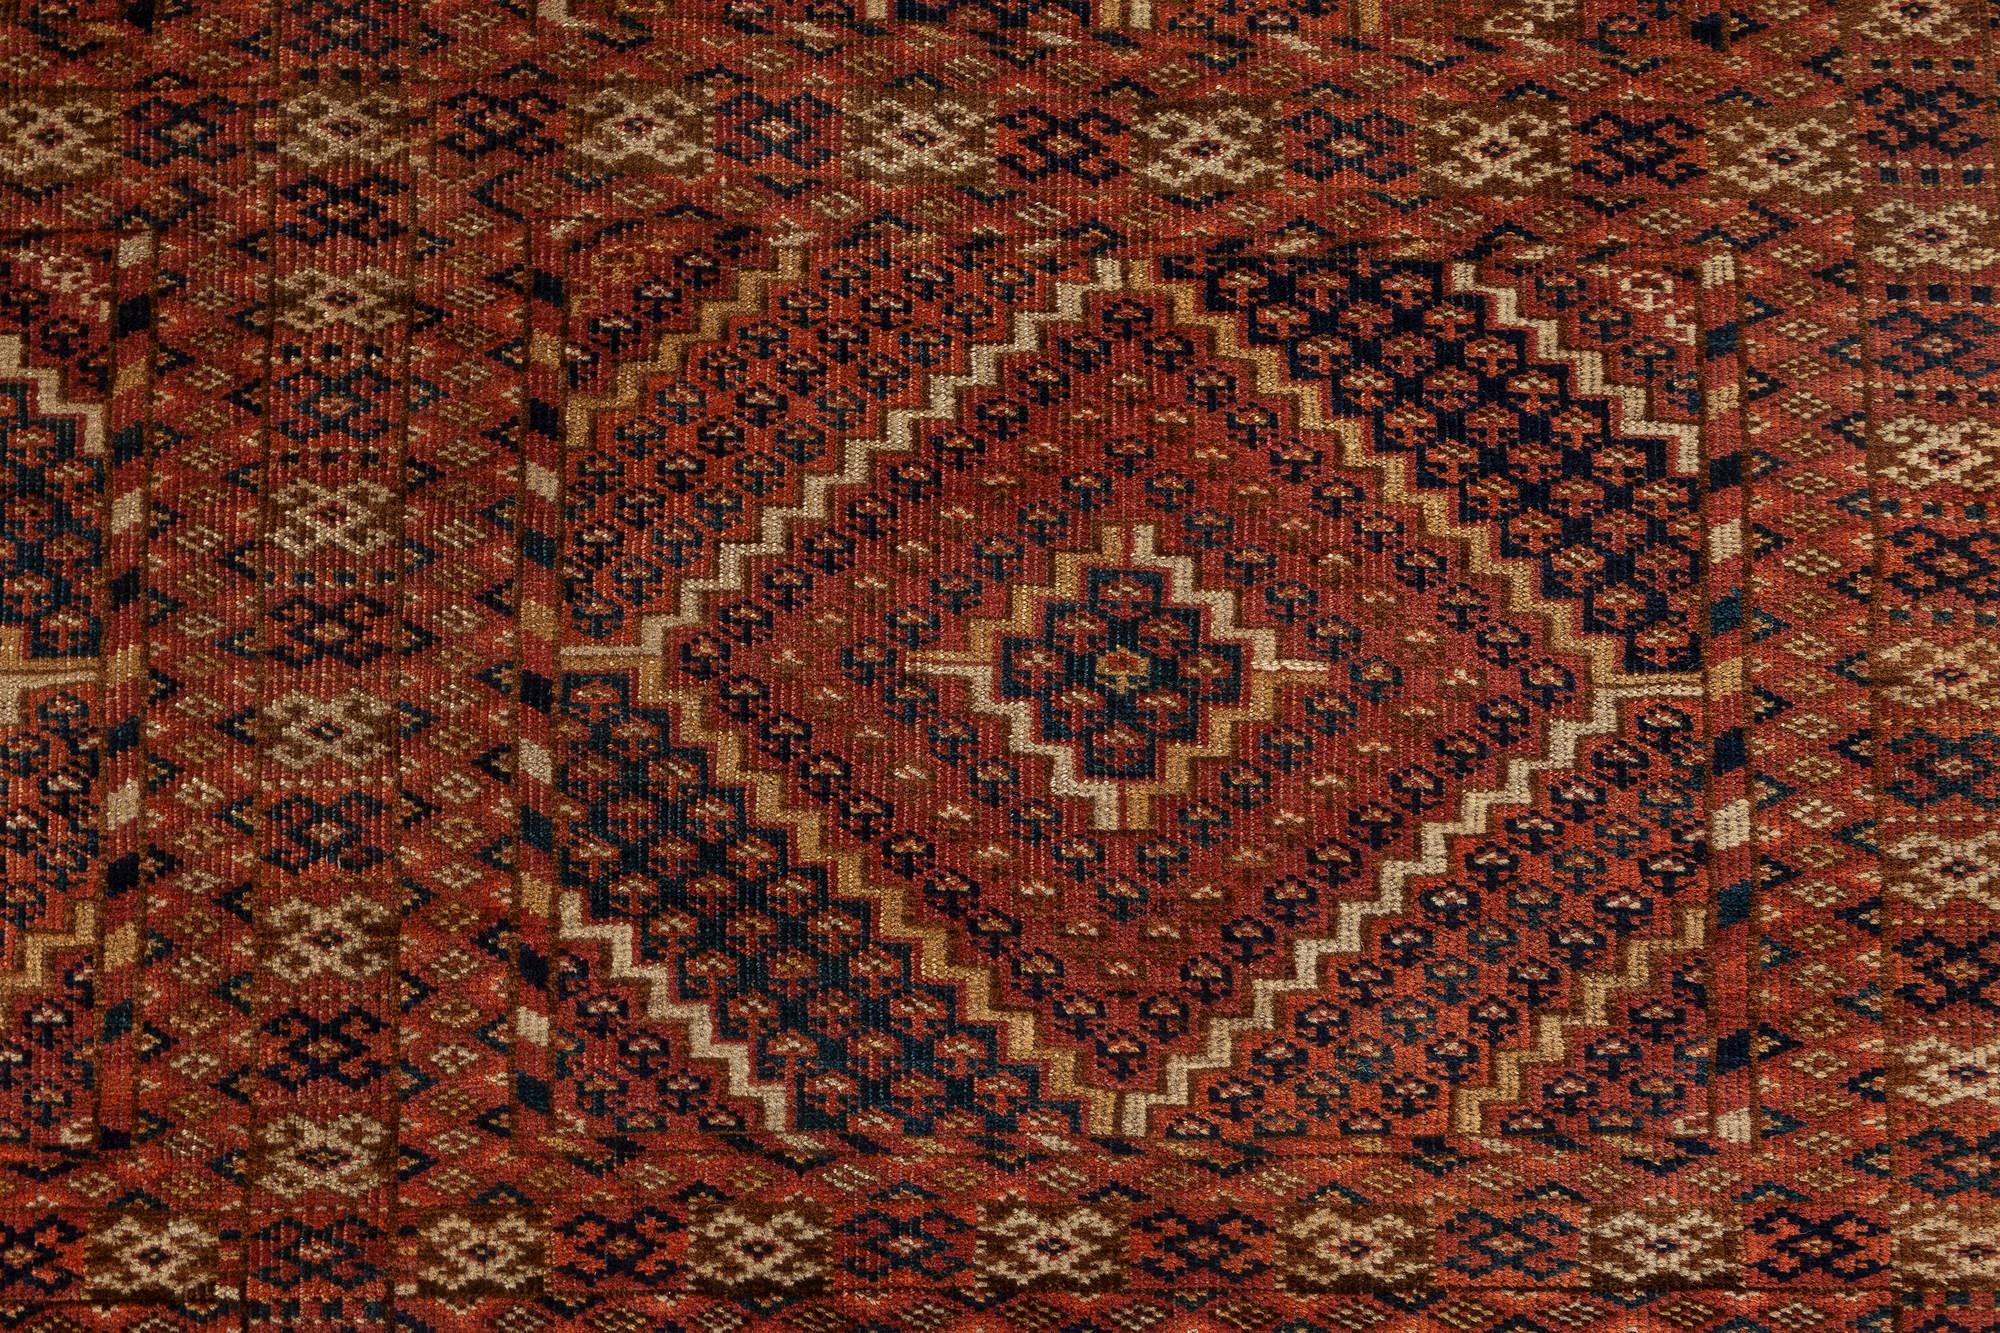 1900s Caucasian handmade wool rug in beige, blue, brown and red.
Size: 4'6